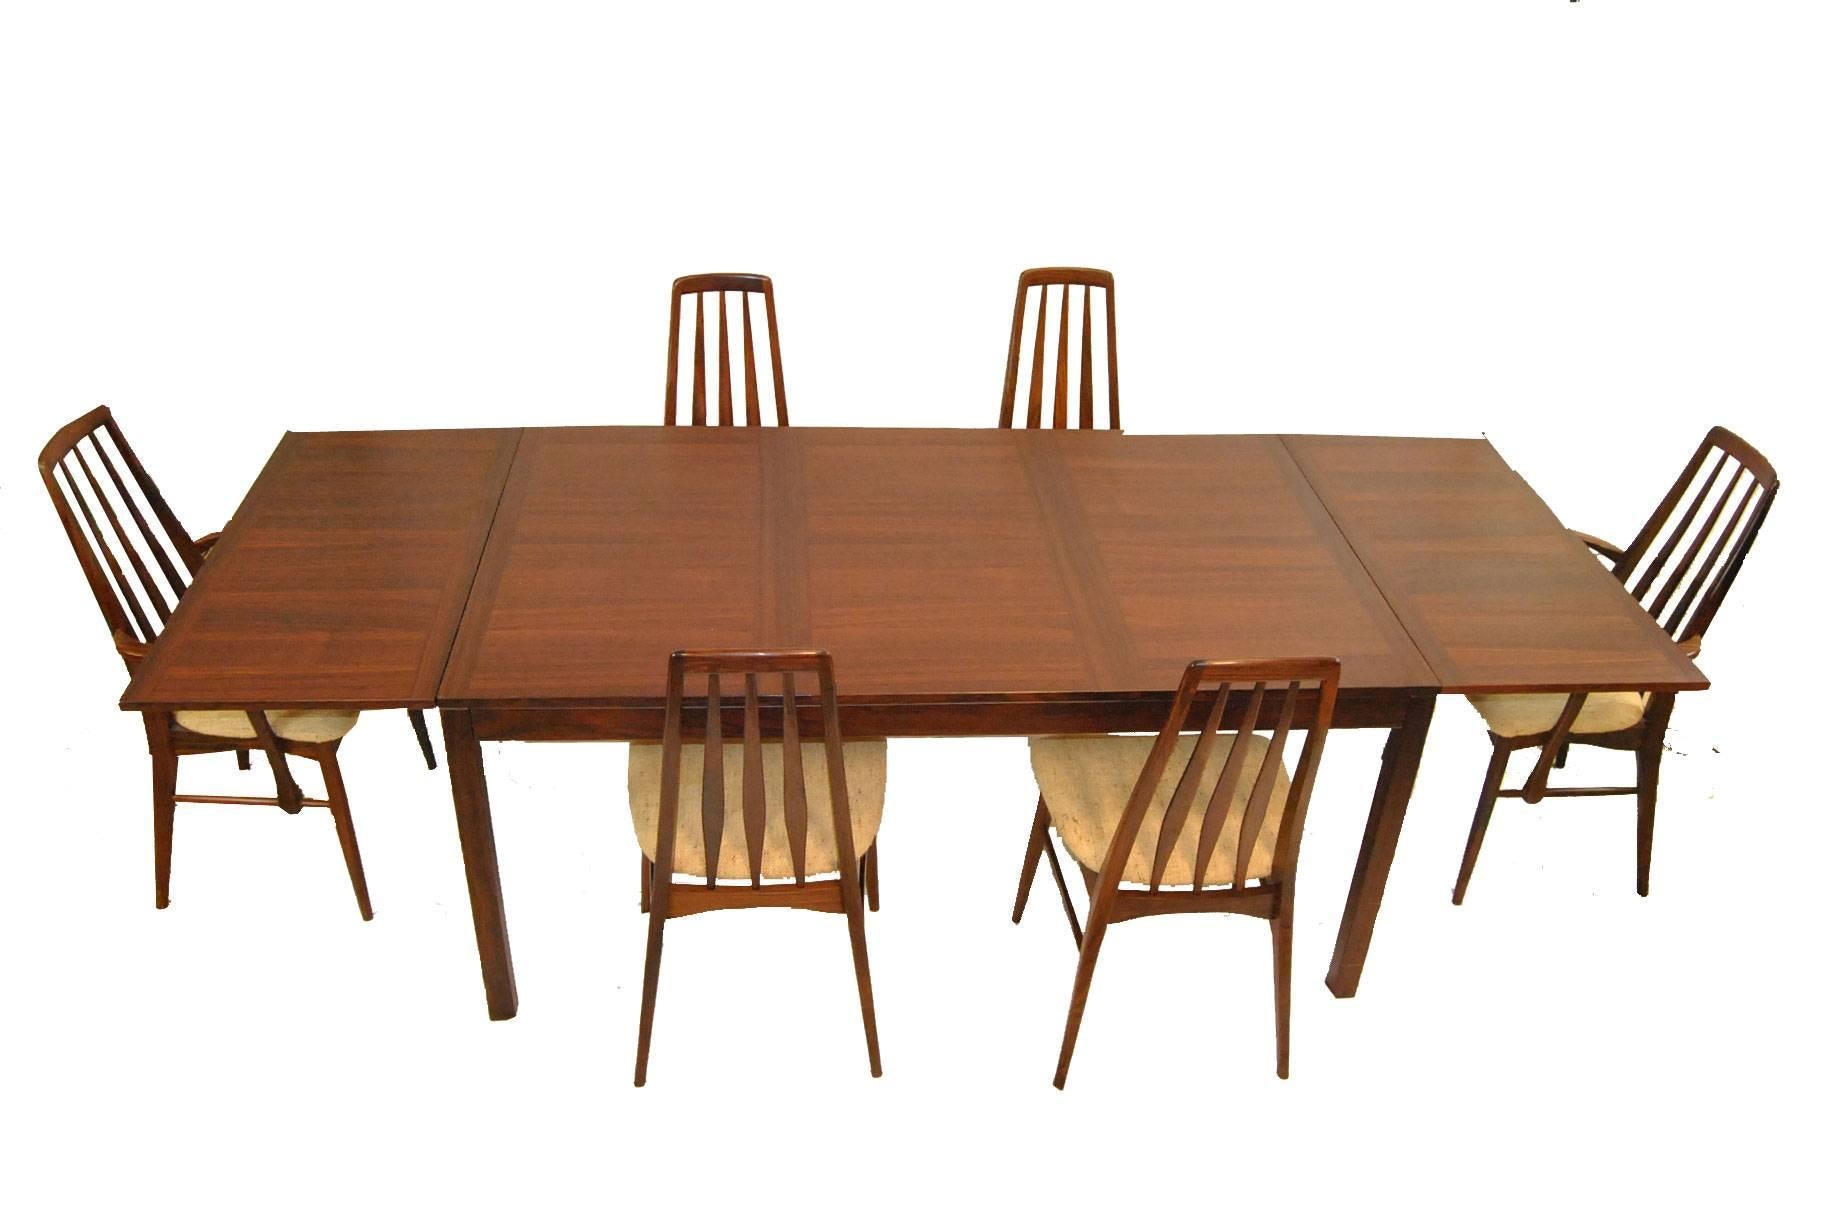 A great Mid-Century dining set in rosewood. The table has wonderful rich graining and is 65" long by 39.5" wide with two 19.5" leafs. Leafs can be removed or dropped down to the side. Table is by Vejle Stole, Mobelfabrik, Denmark and